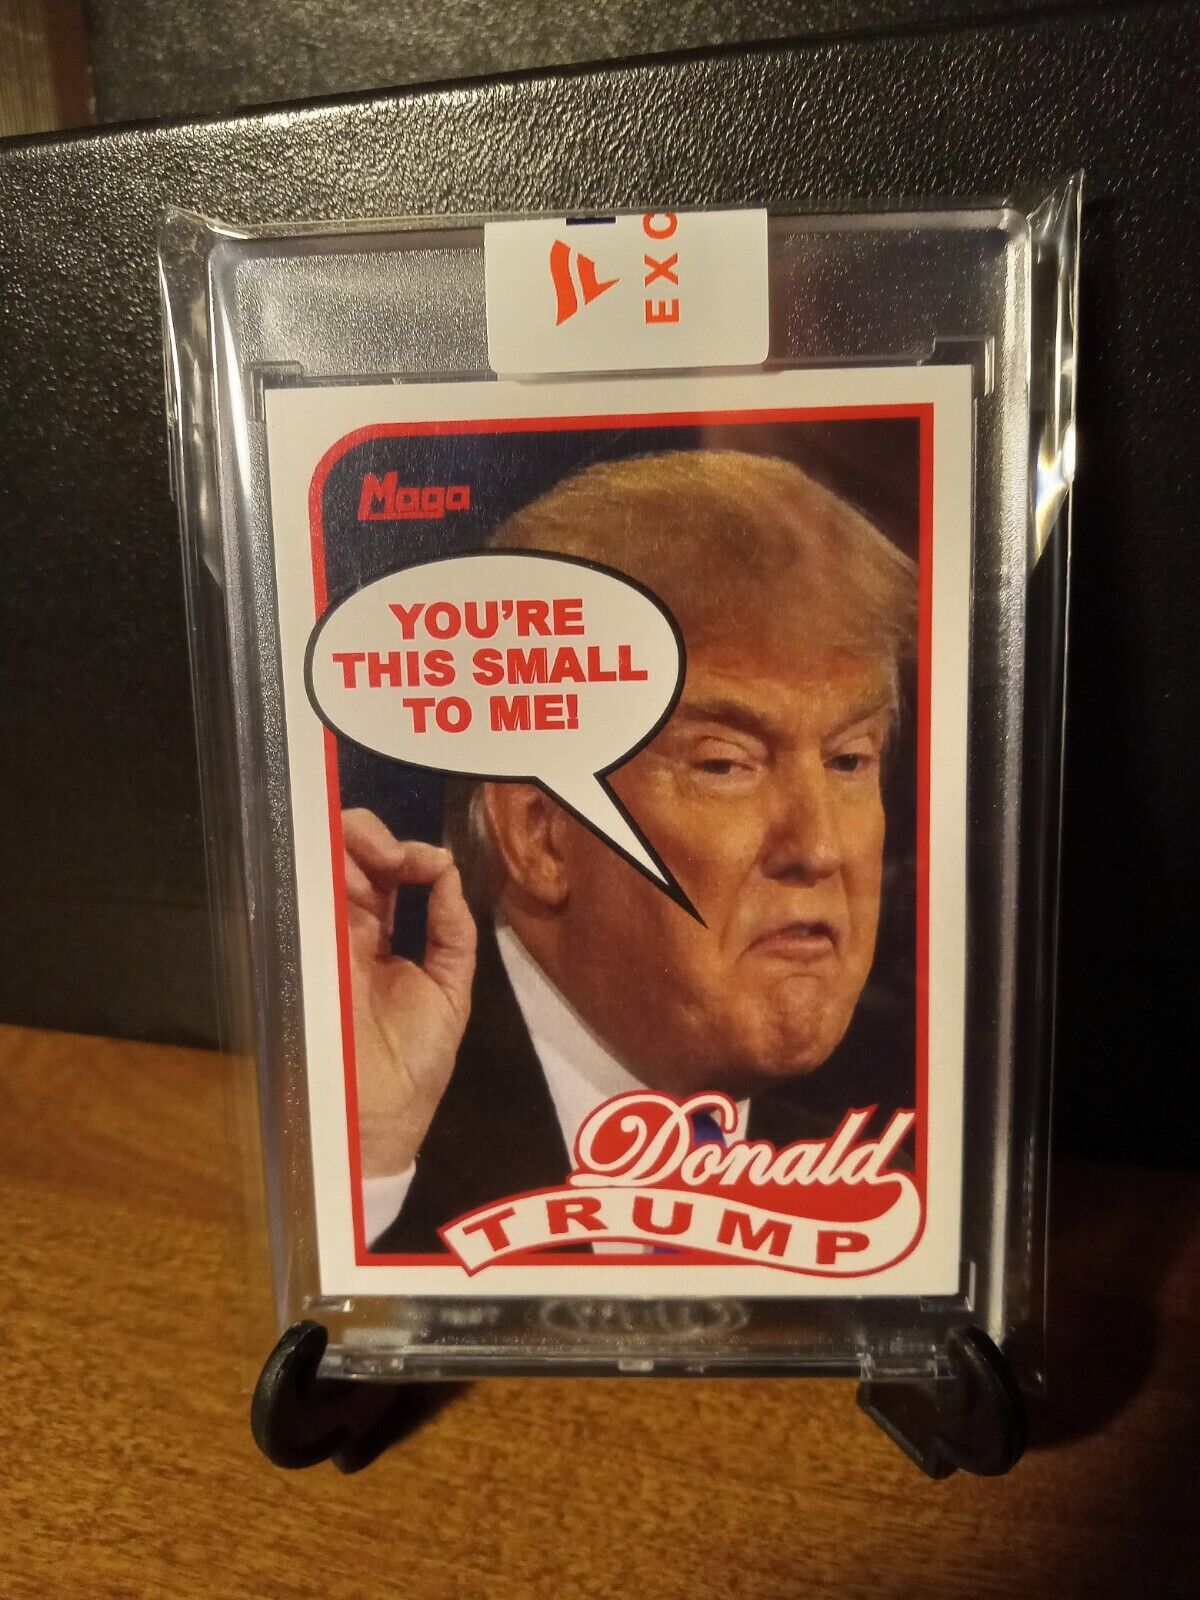 Donald Trump 1 Of 1 SEALED MAGA 2020 Presidential Campaign Card 1/1 EXCLUSIVE